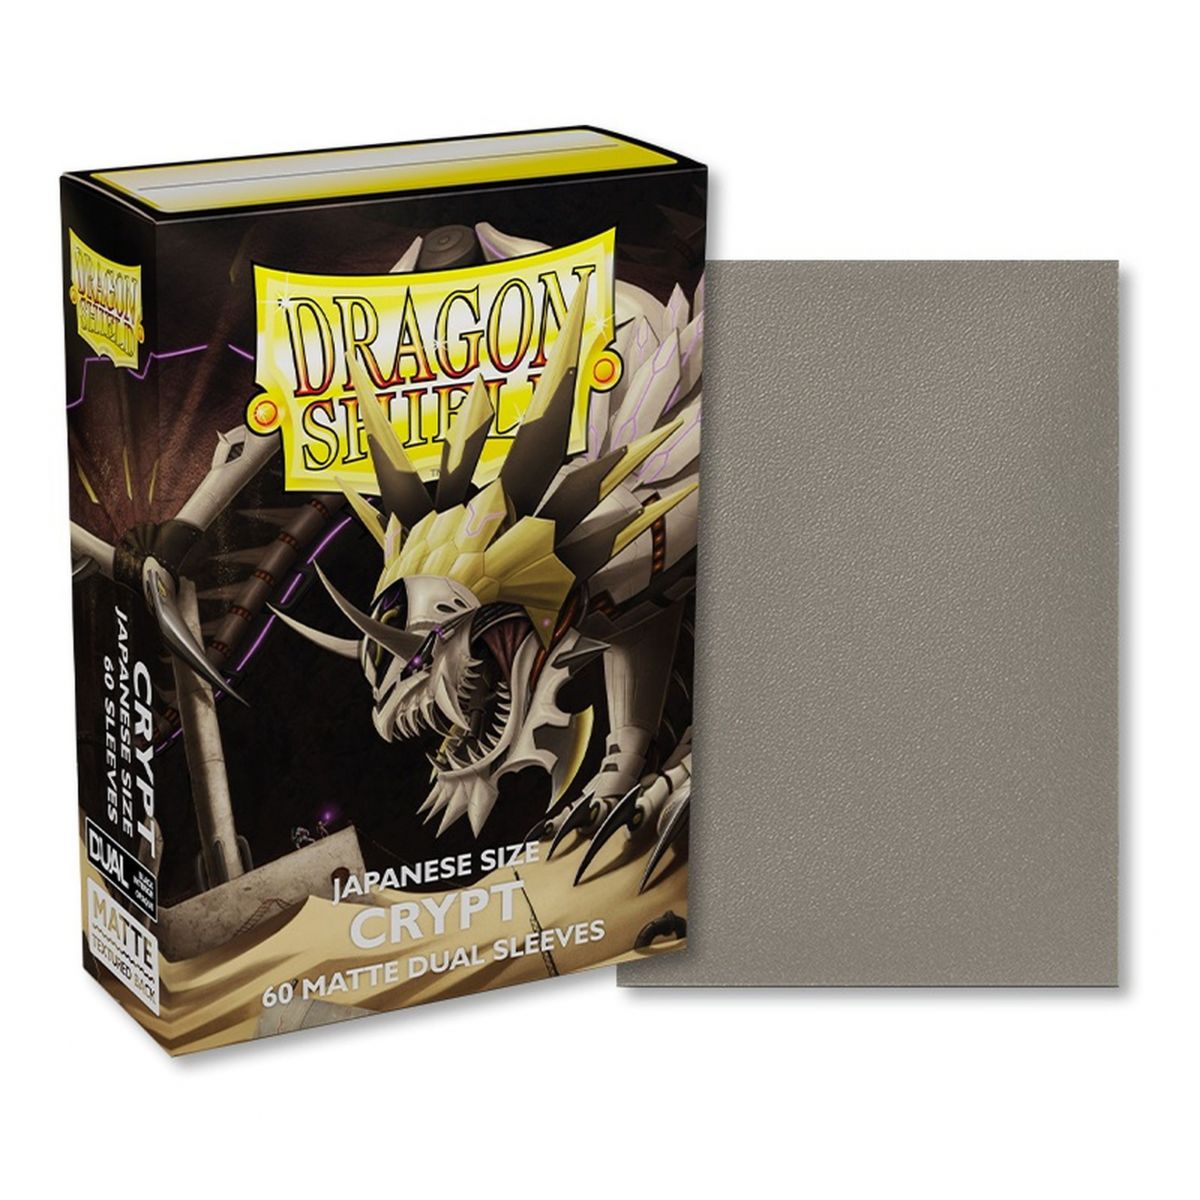 Item Dragon Shield - Small Sleeves - Japanese Size - Dual Matte Crypt (60)